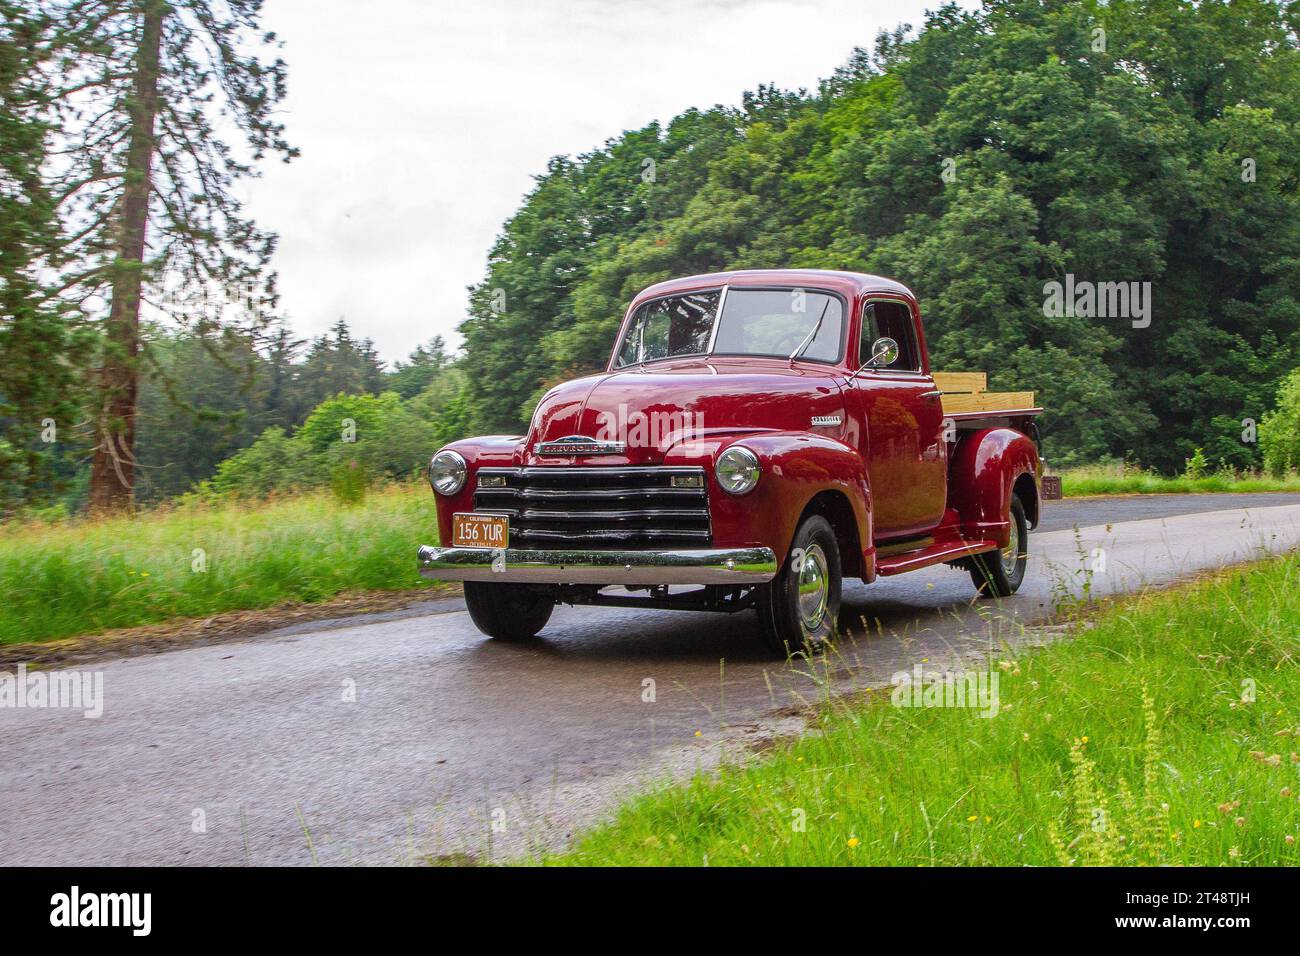 1951 50s fifties American Red Chevrolet Chevrolet Car Petrol 3859 cc; arriving at Holker Hall vintage and classic car show, UK Stock Photo